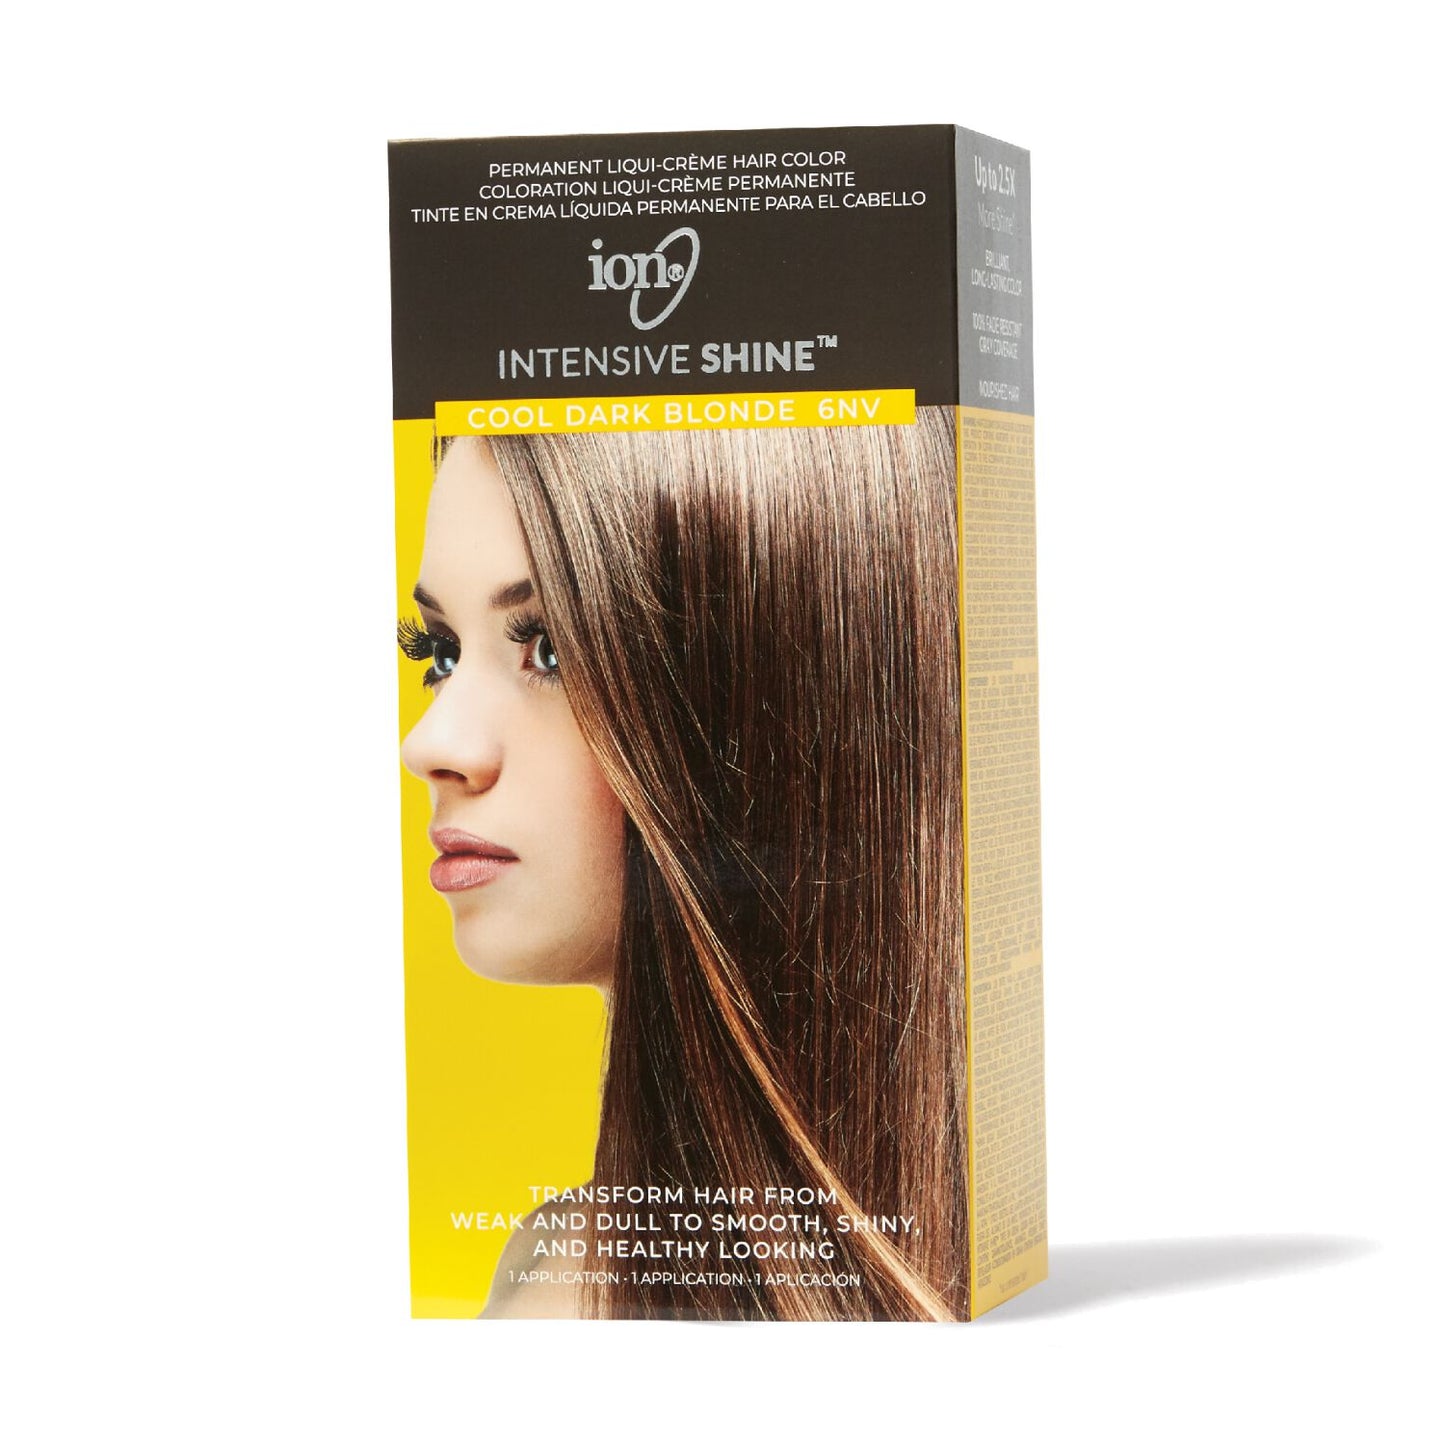 Intensive Shine  by   ion Intensive Shine Hair Color Kit Cool Dark Blonde 6NV